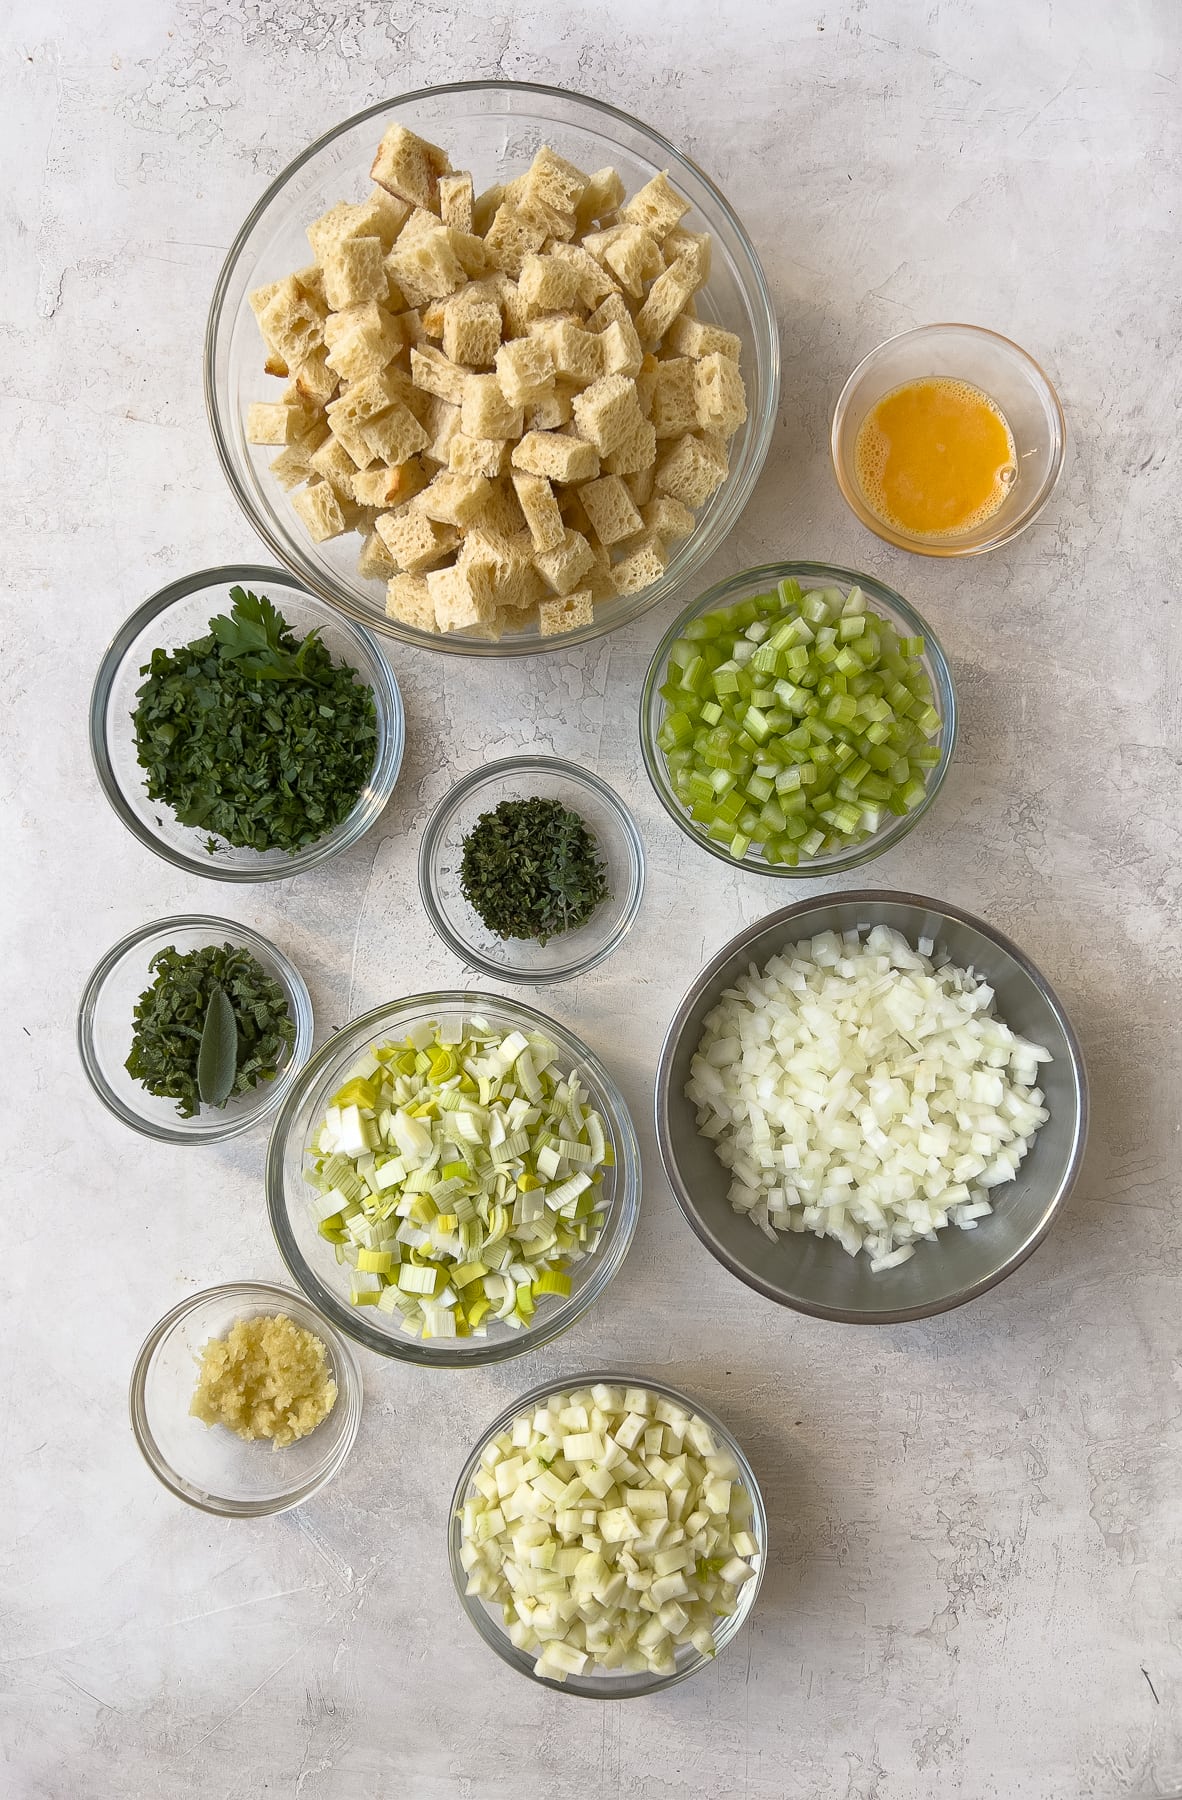 Prepped stuffing ingredients in bowls.